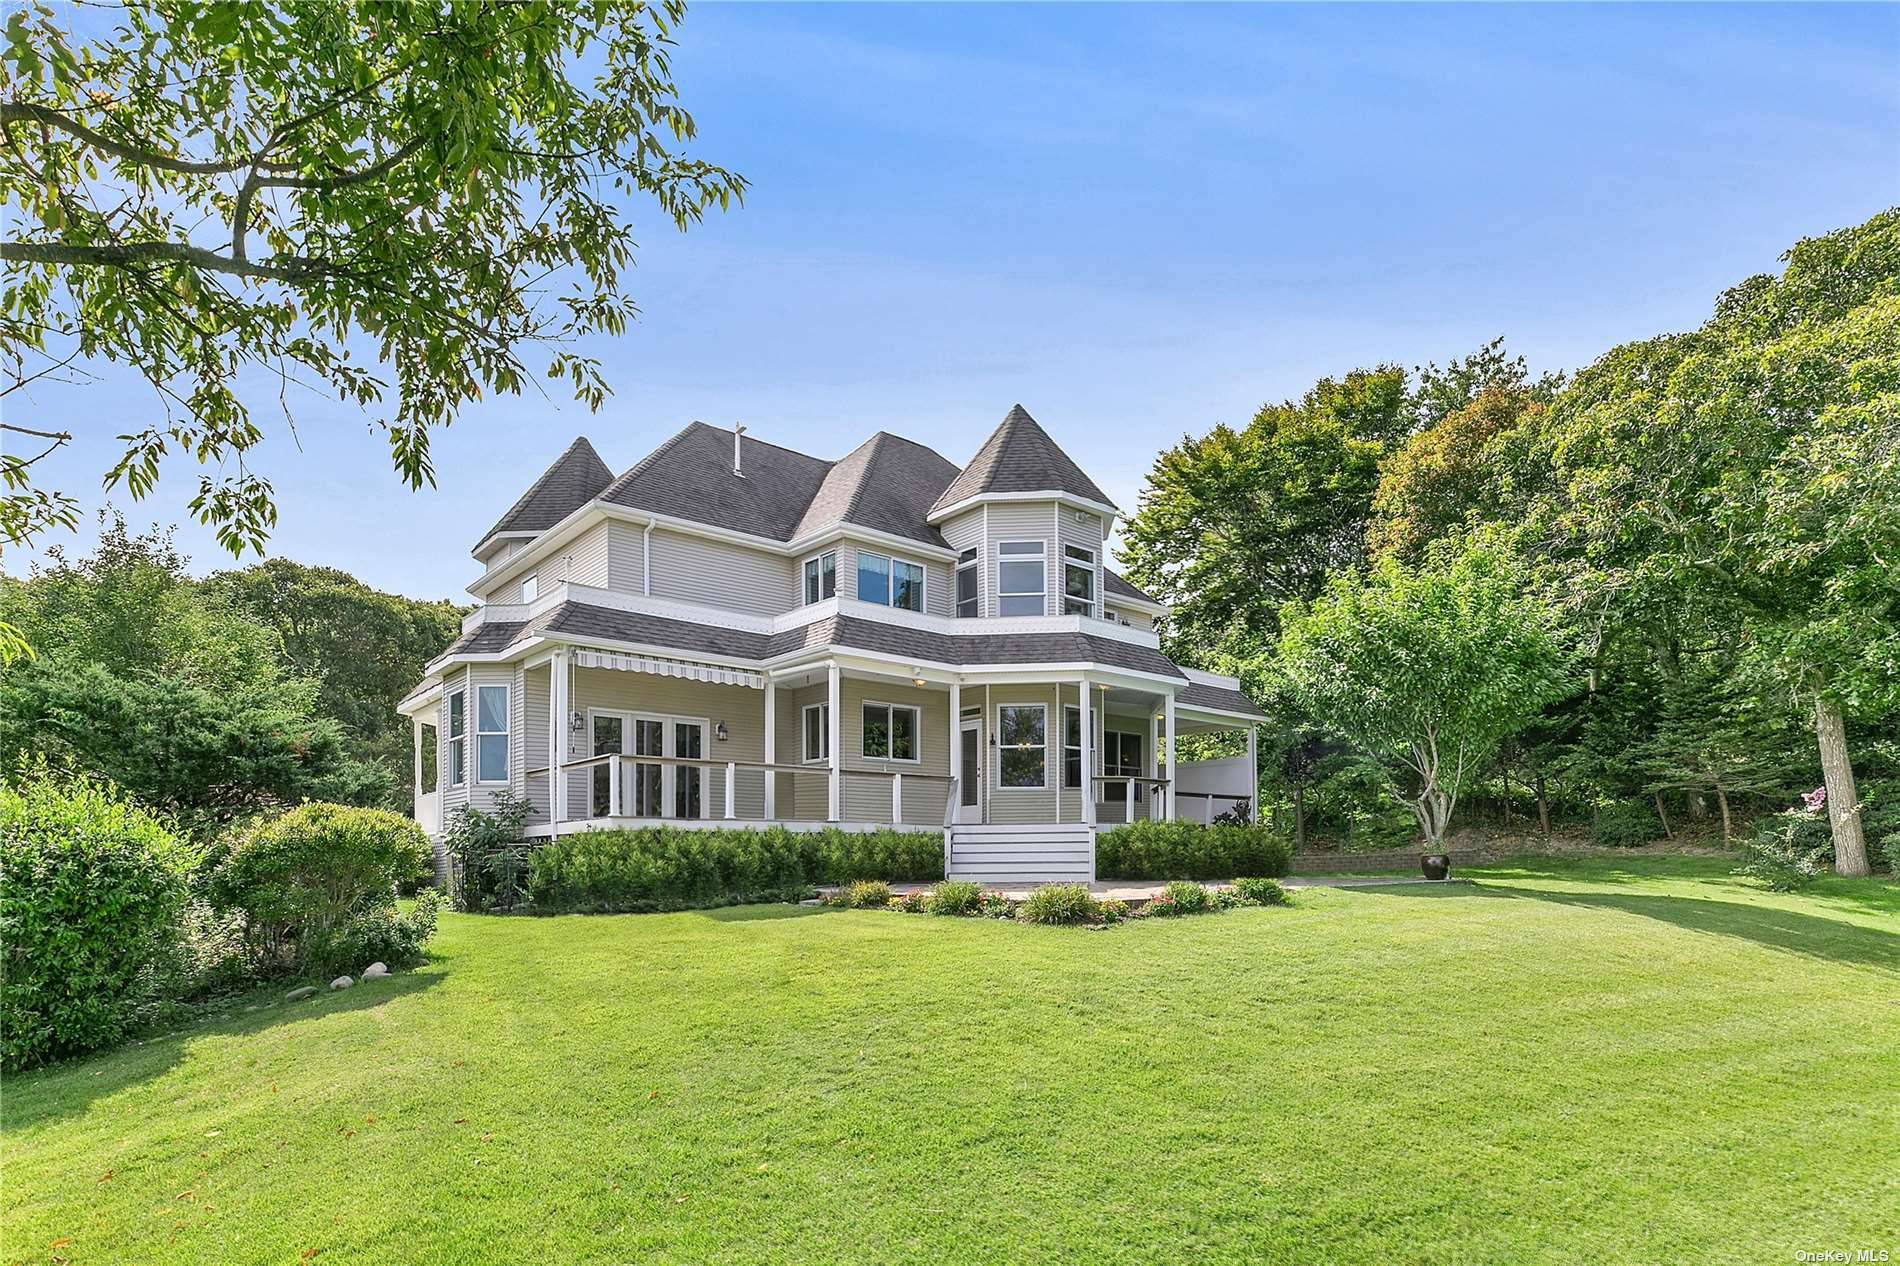 VICTORIAN OVERLOOKING THE SOUND Set 100' above the Long Island Sound, this 2 story, 3br, 2.